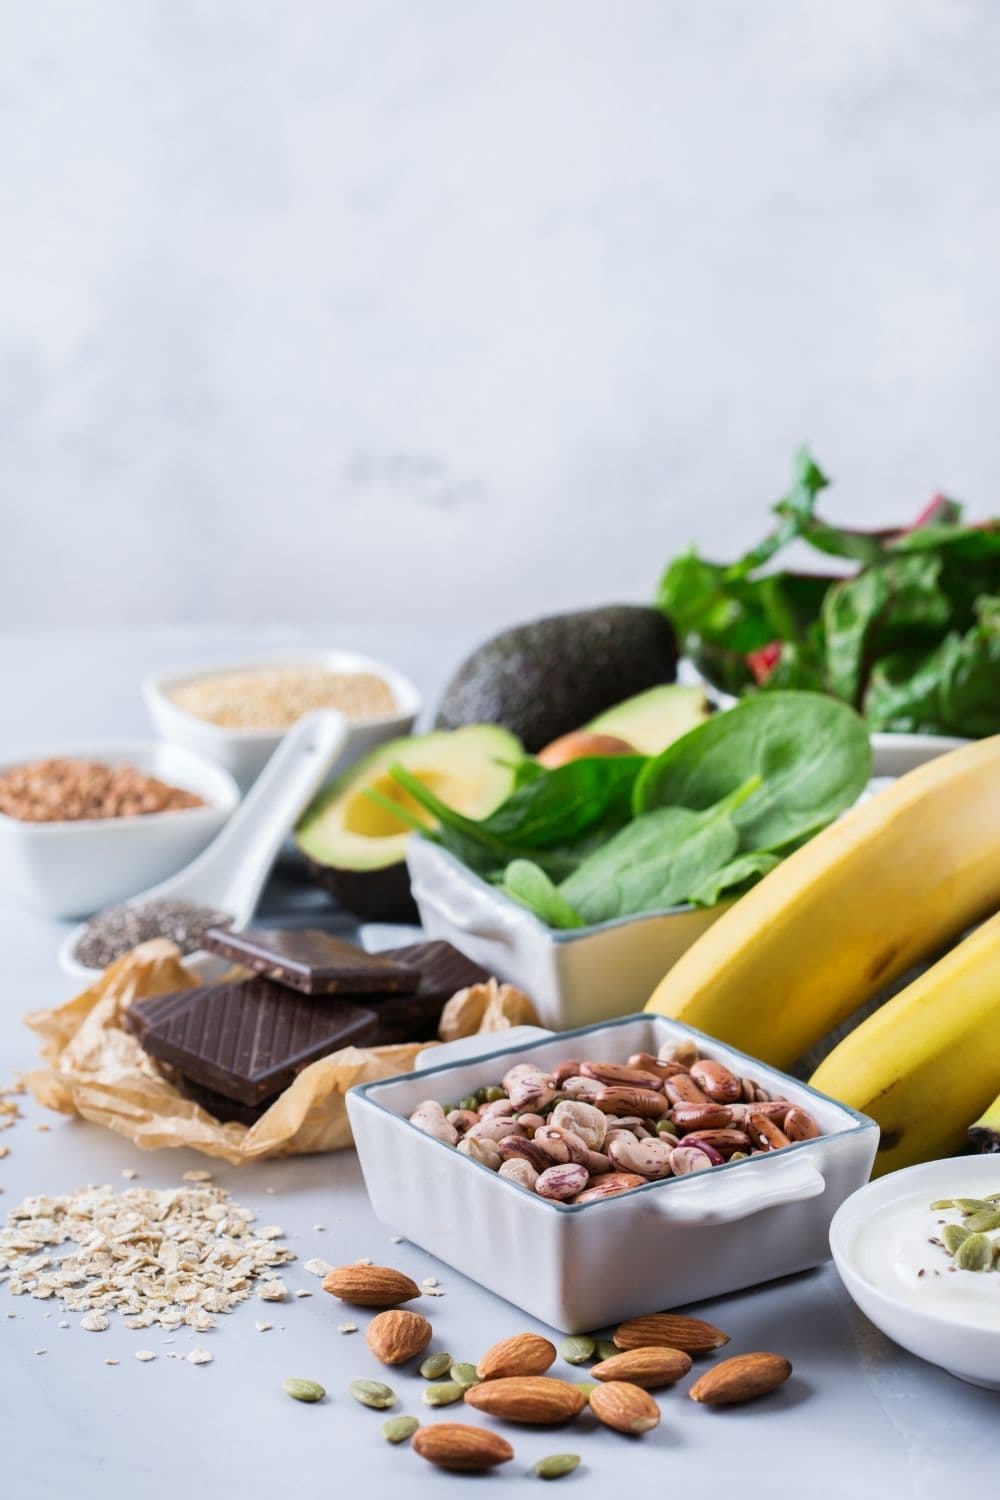 Nuts, bananas, and other foods high in magnesium on a table.